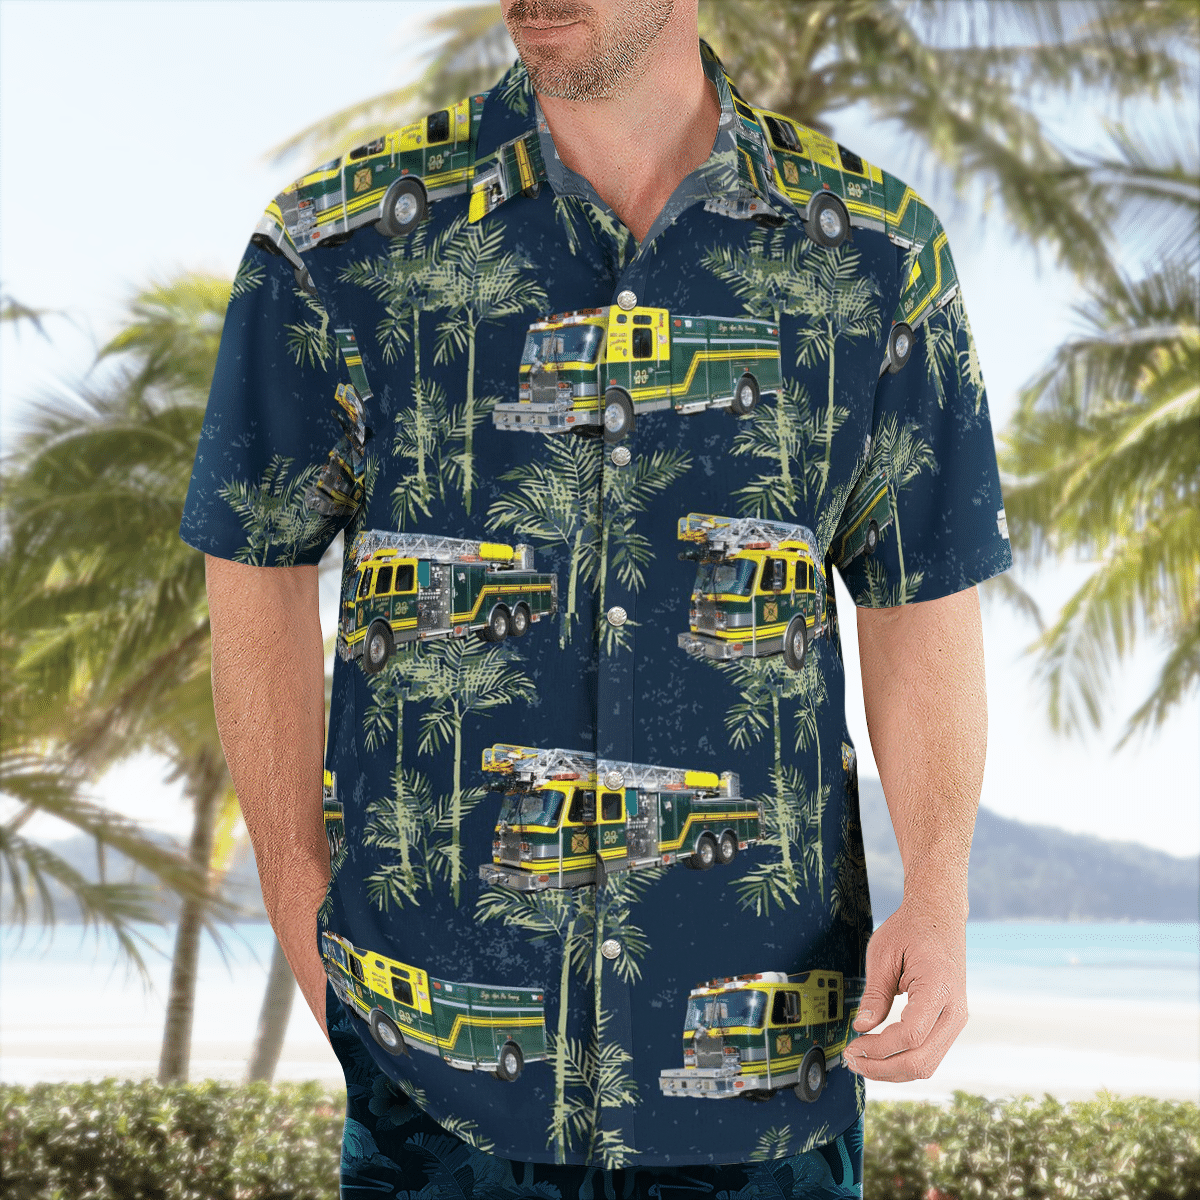 There are several styles of beach and Hawaiian shorts and tops to choose from 66